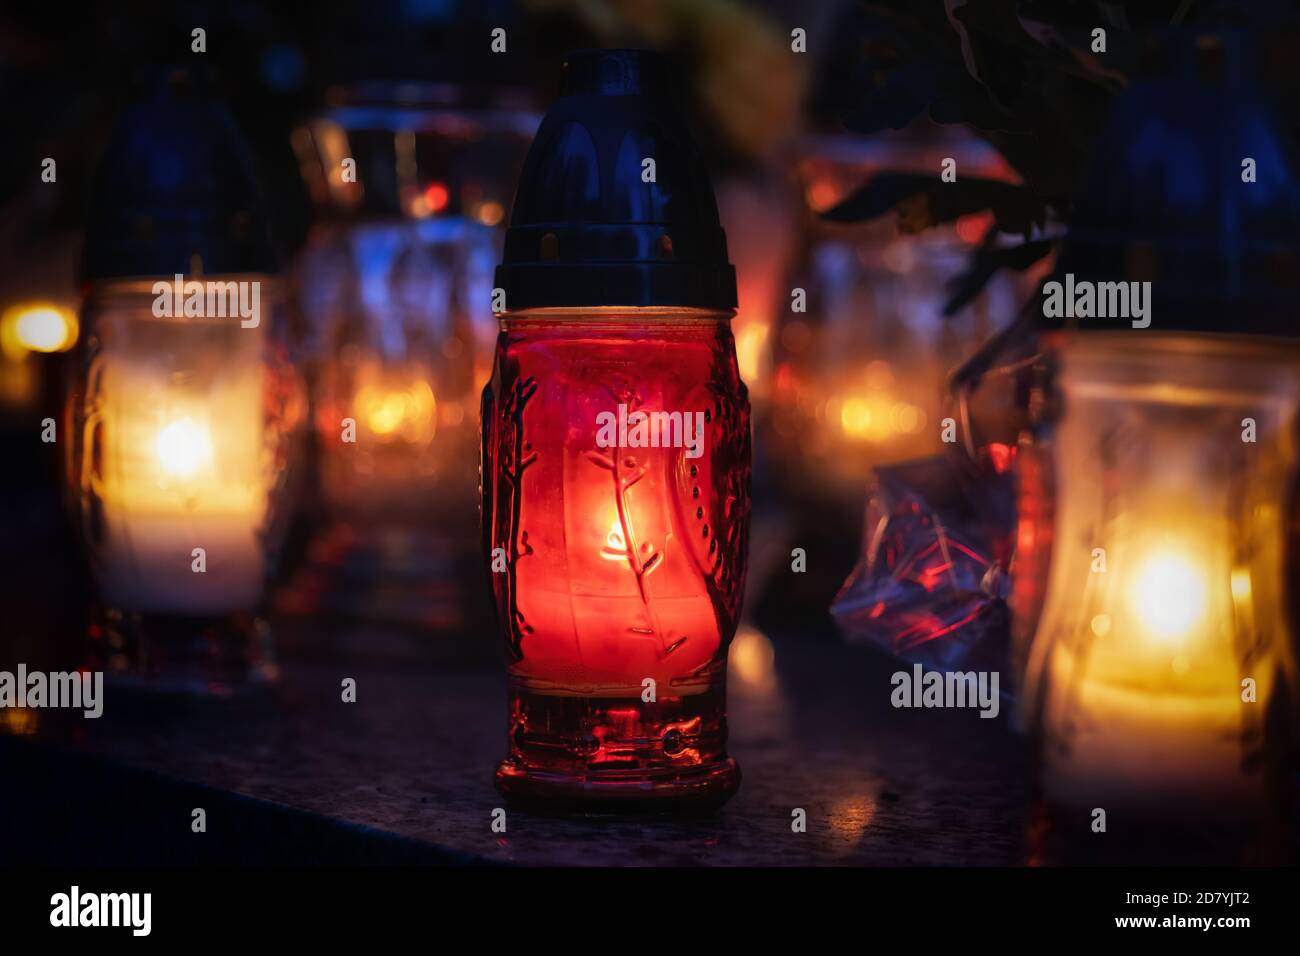 Ethereal candle lights lit on All Saints Day night, Christian tradition, selective focus, shallow depth of field. Stock Photo